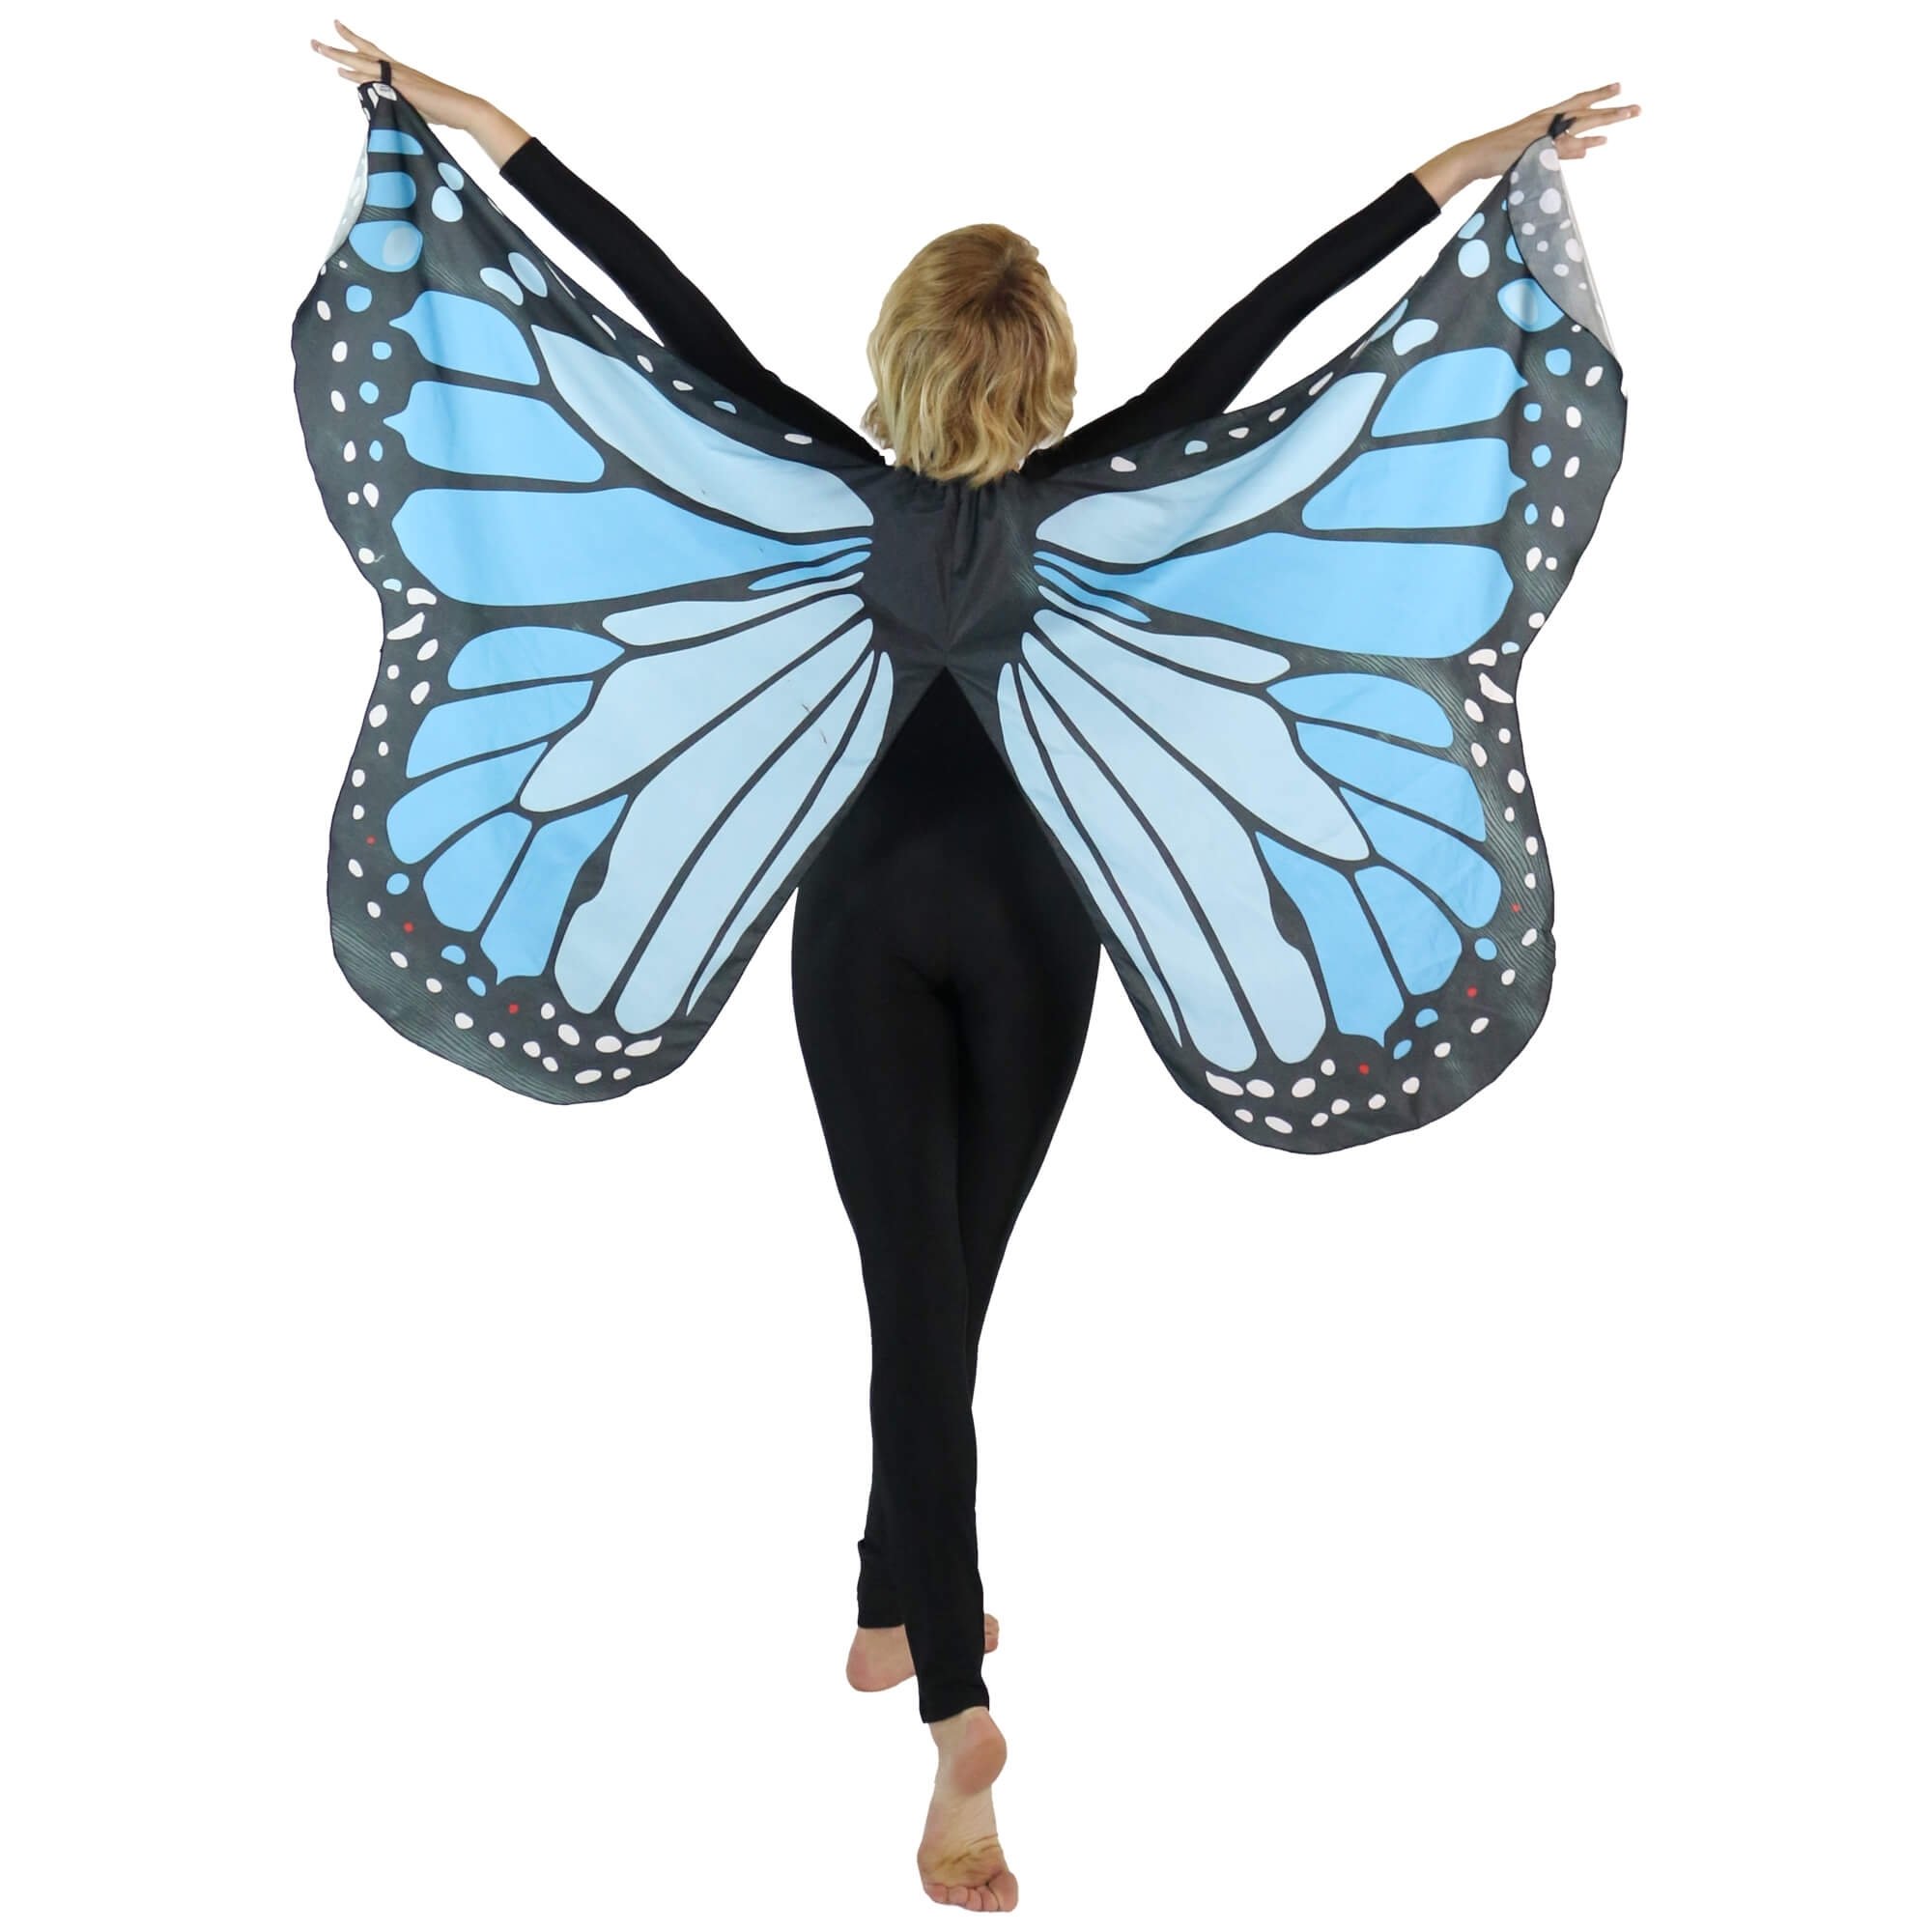 Danzcue Soft Butterfly Dance Wings - Click Image to Close